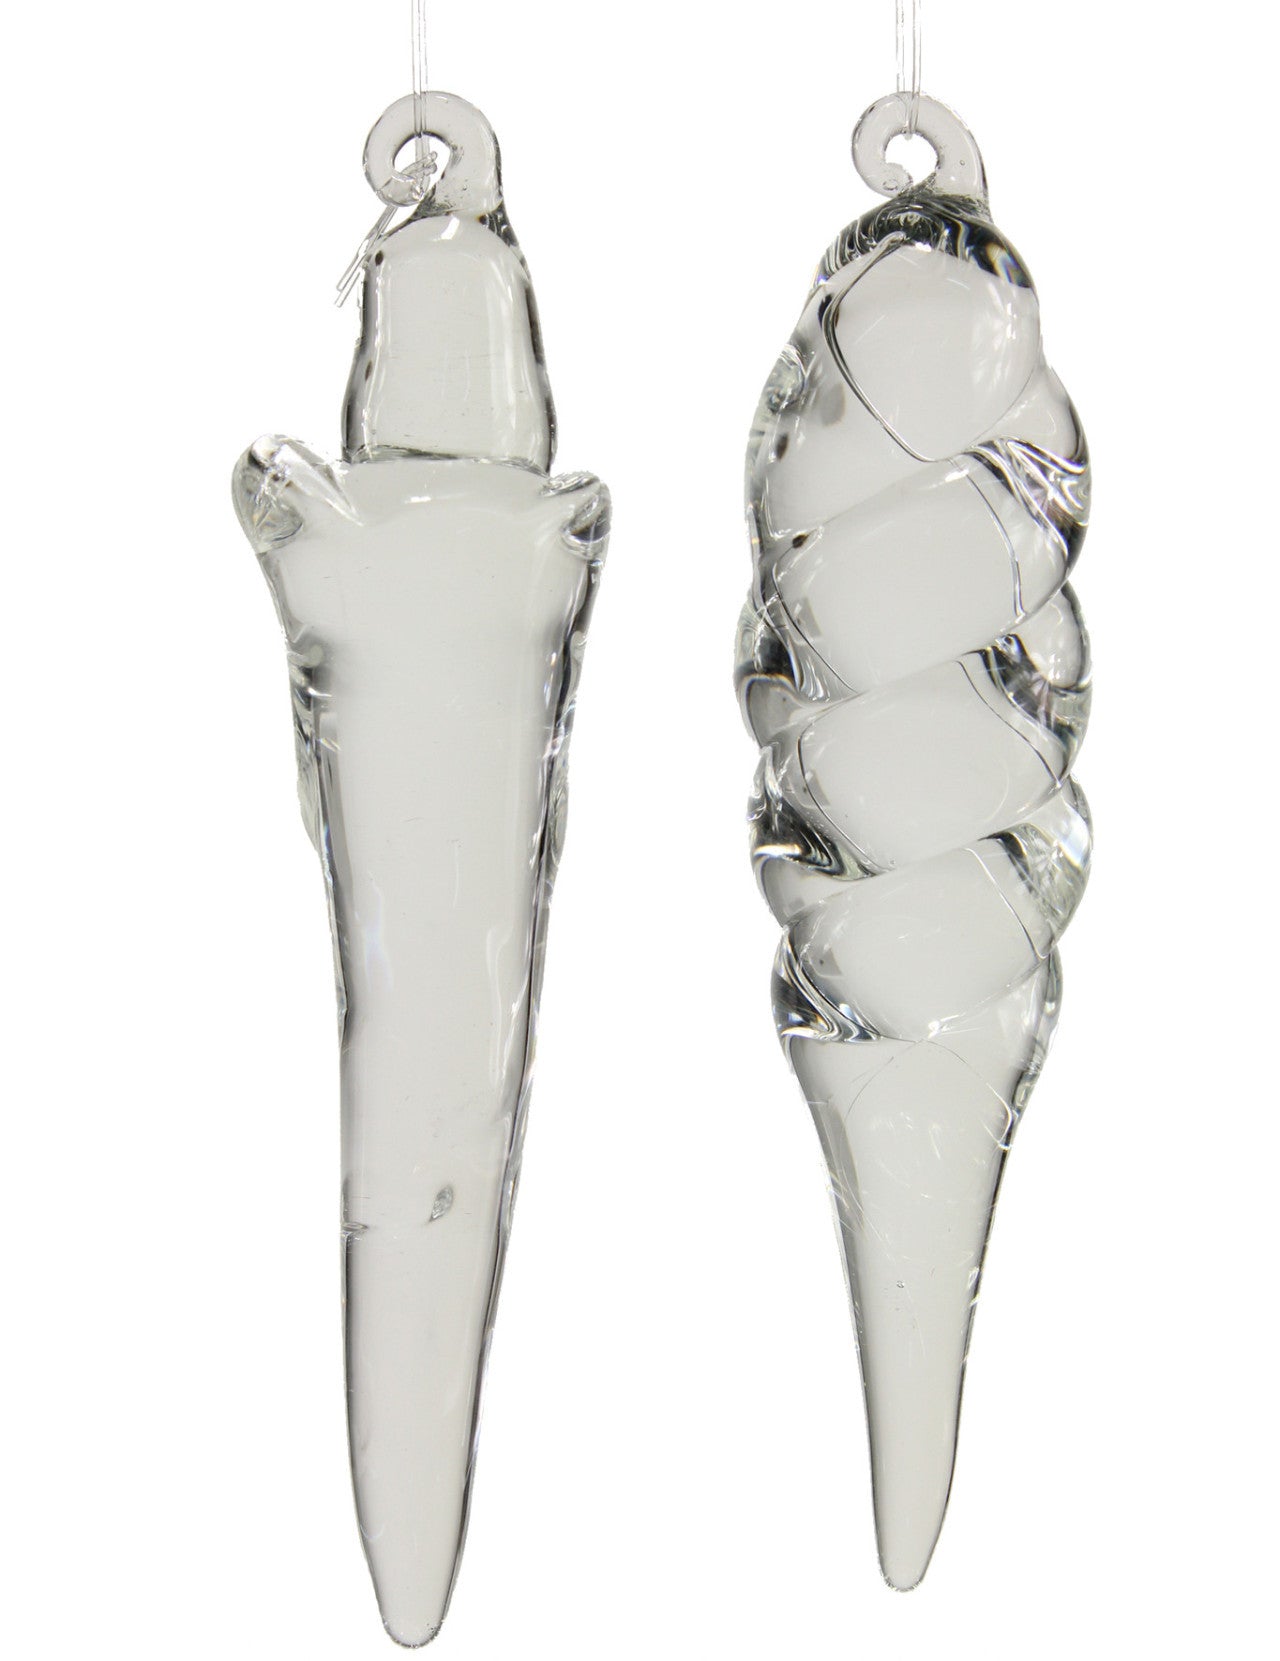 Free-Form Solid Glass Icicle Ornaments